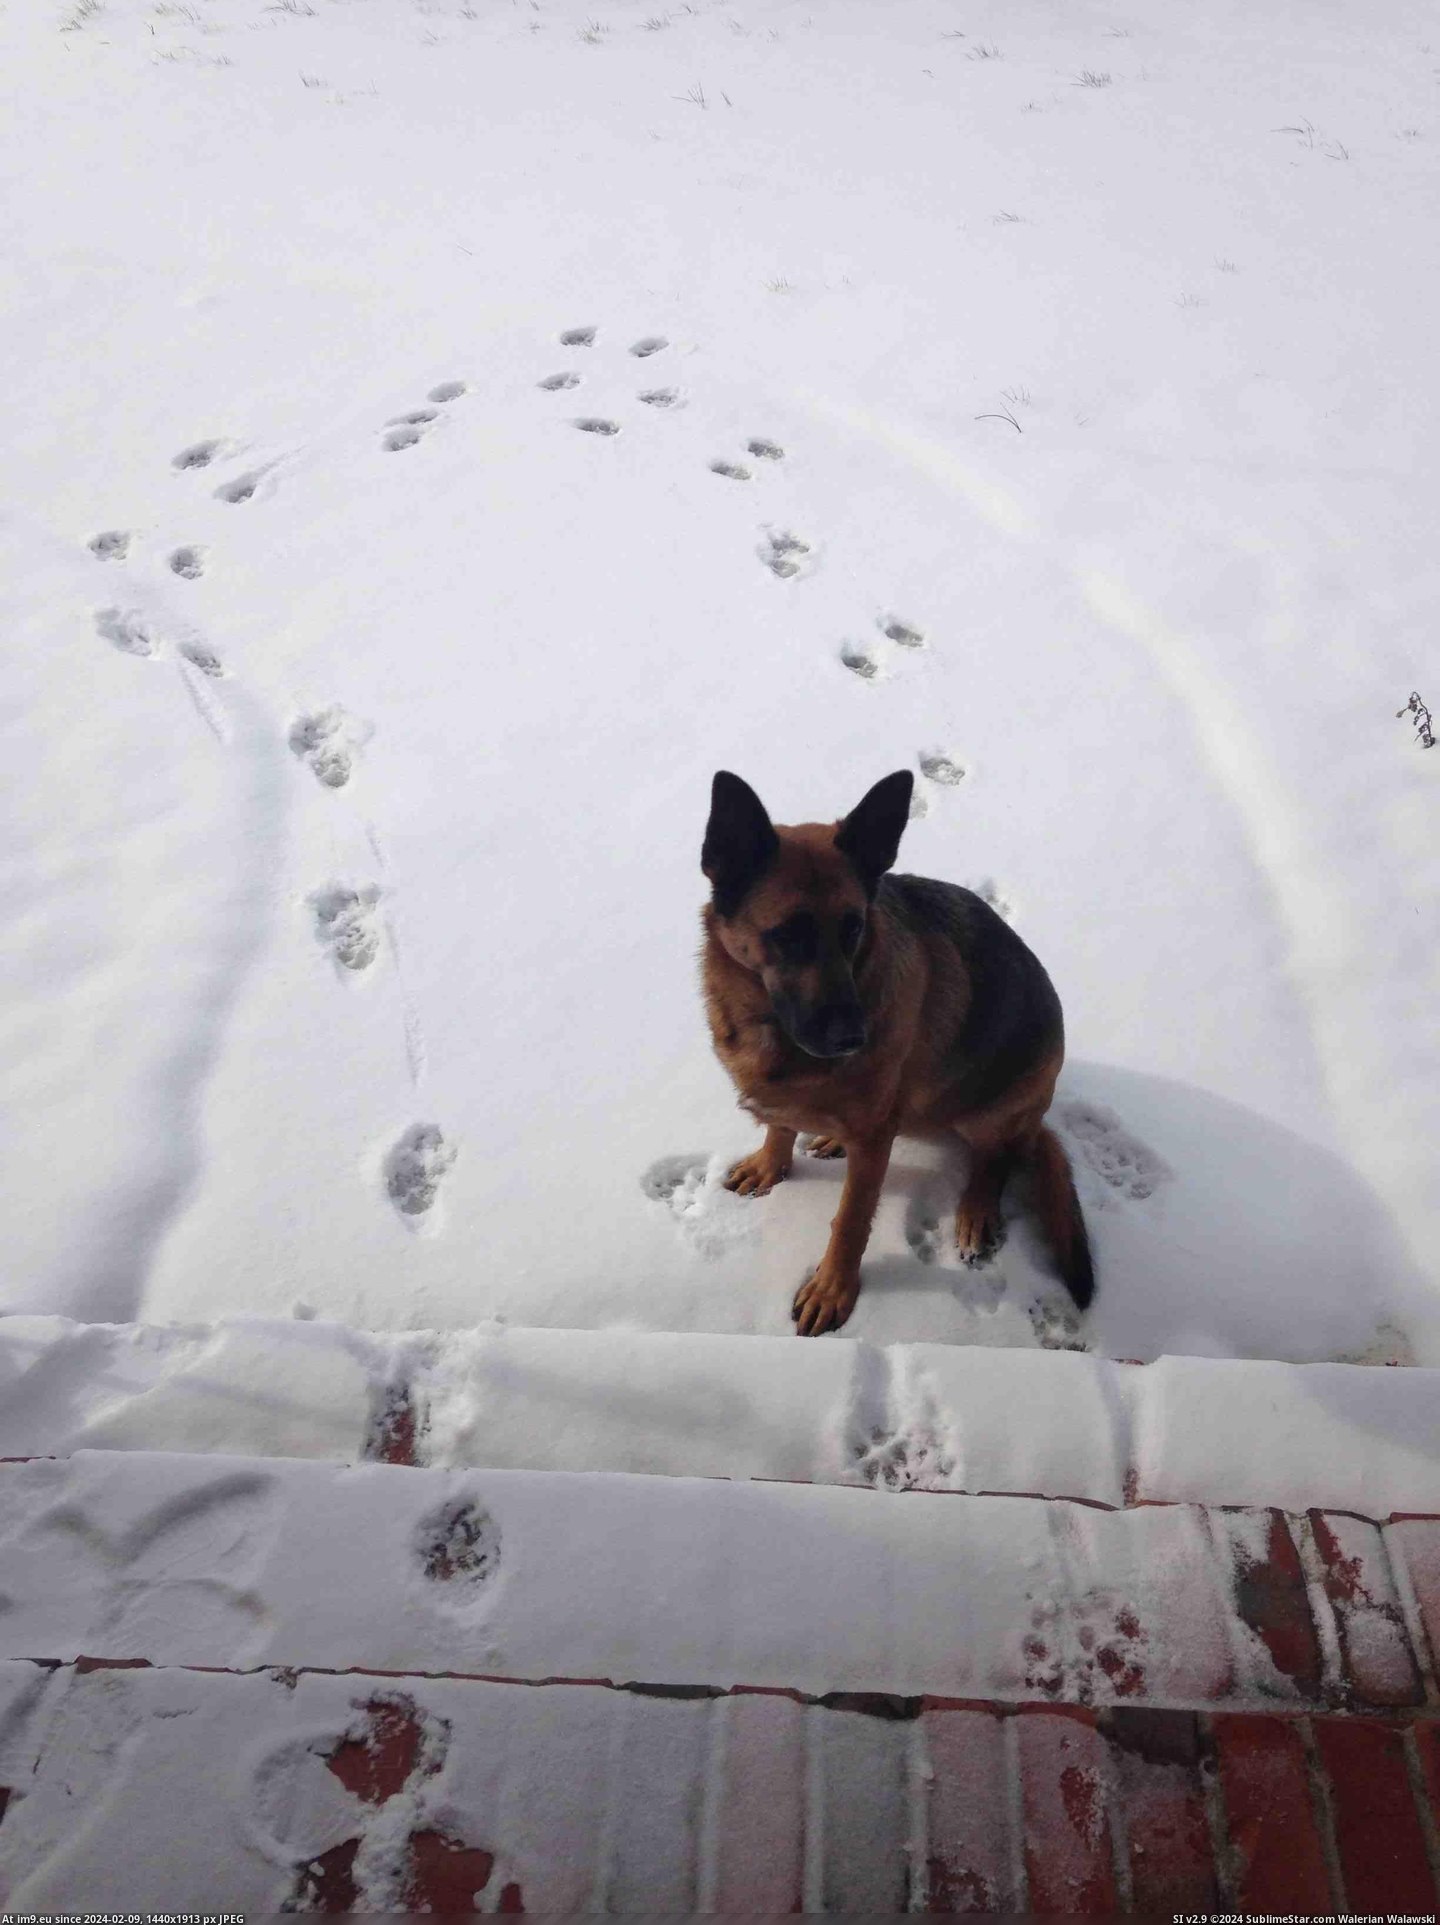 #Time #Dog #Instant #Snow #Nope [Aww] my dog's first time seeing snow....instant 'NOPE' Pic. (Obraz z album My r/AWW favs))